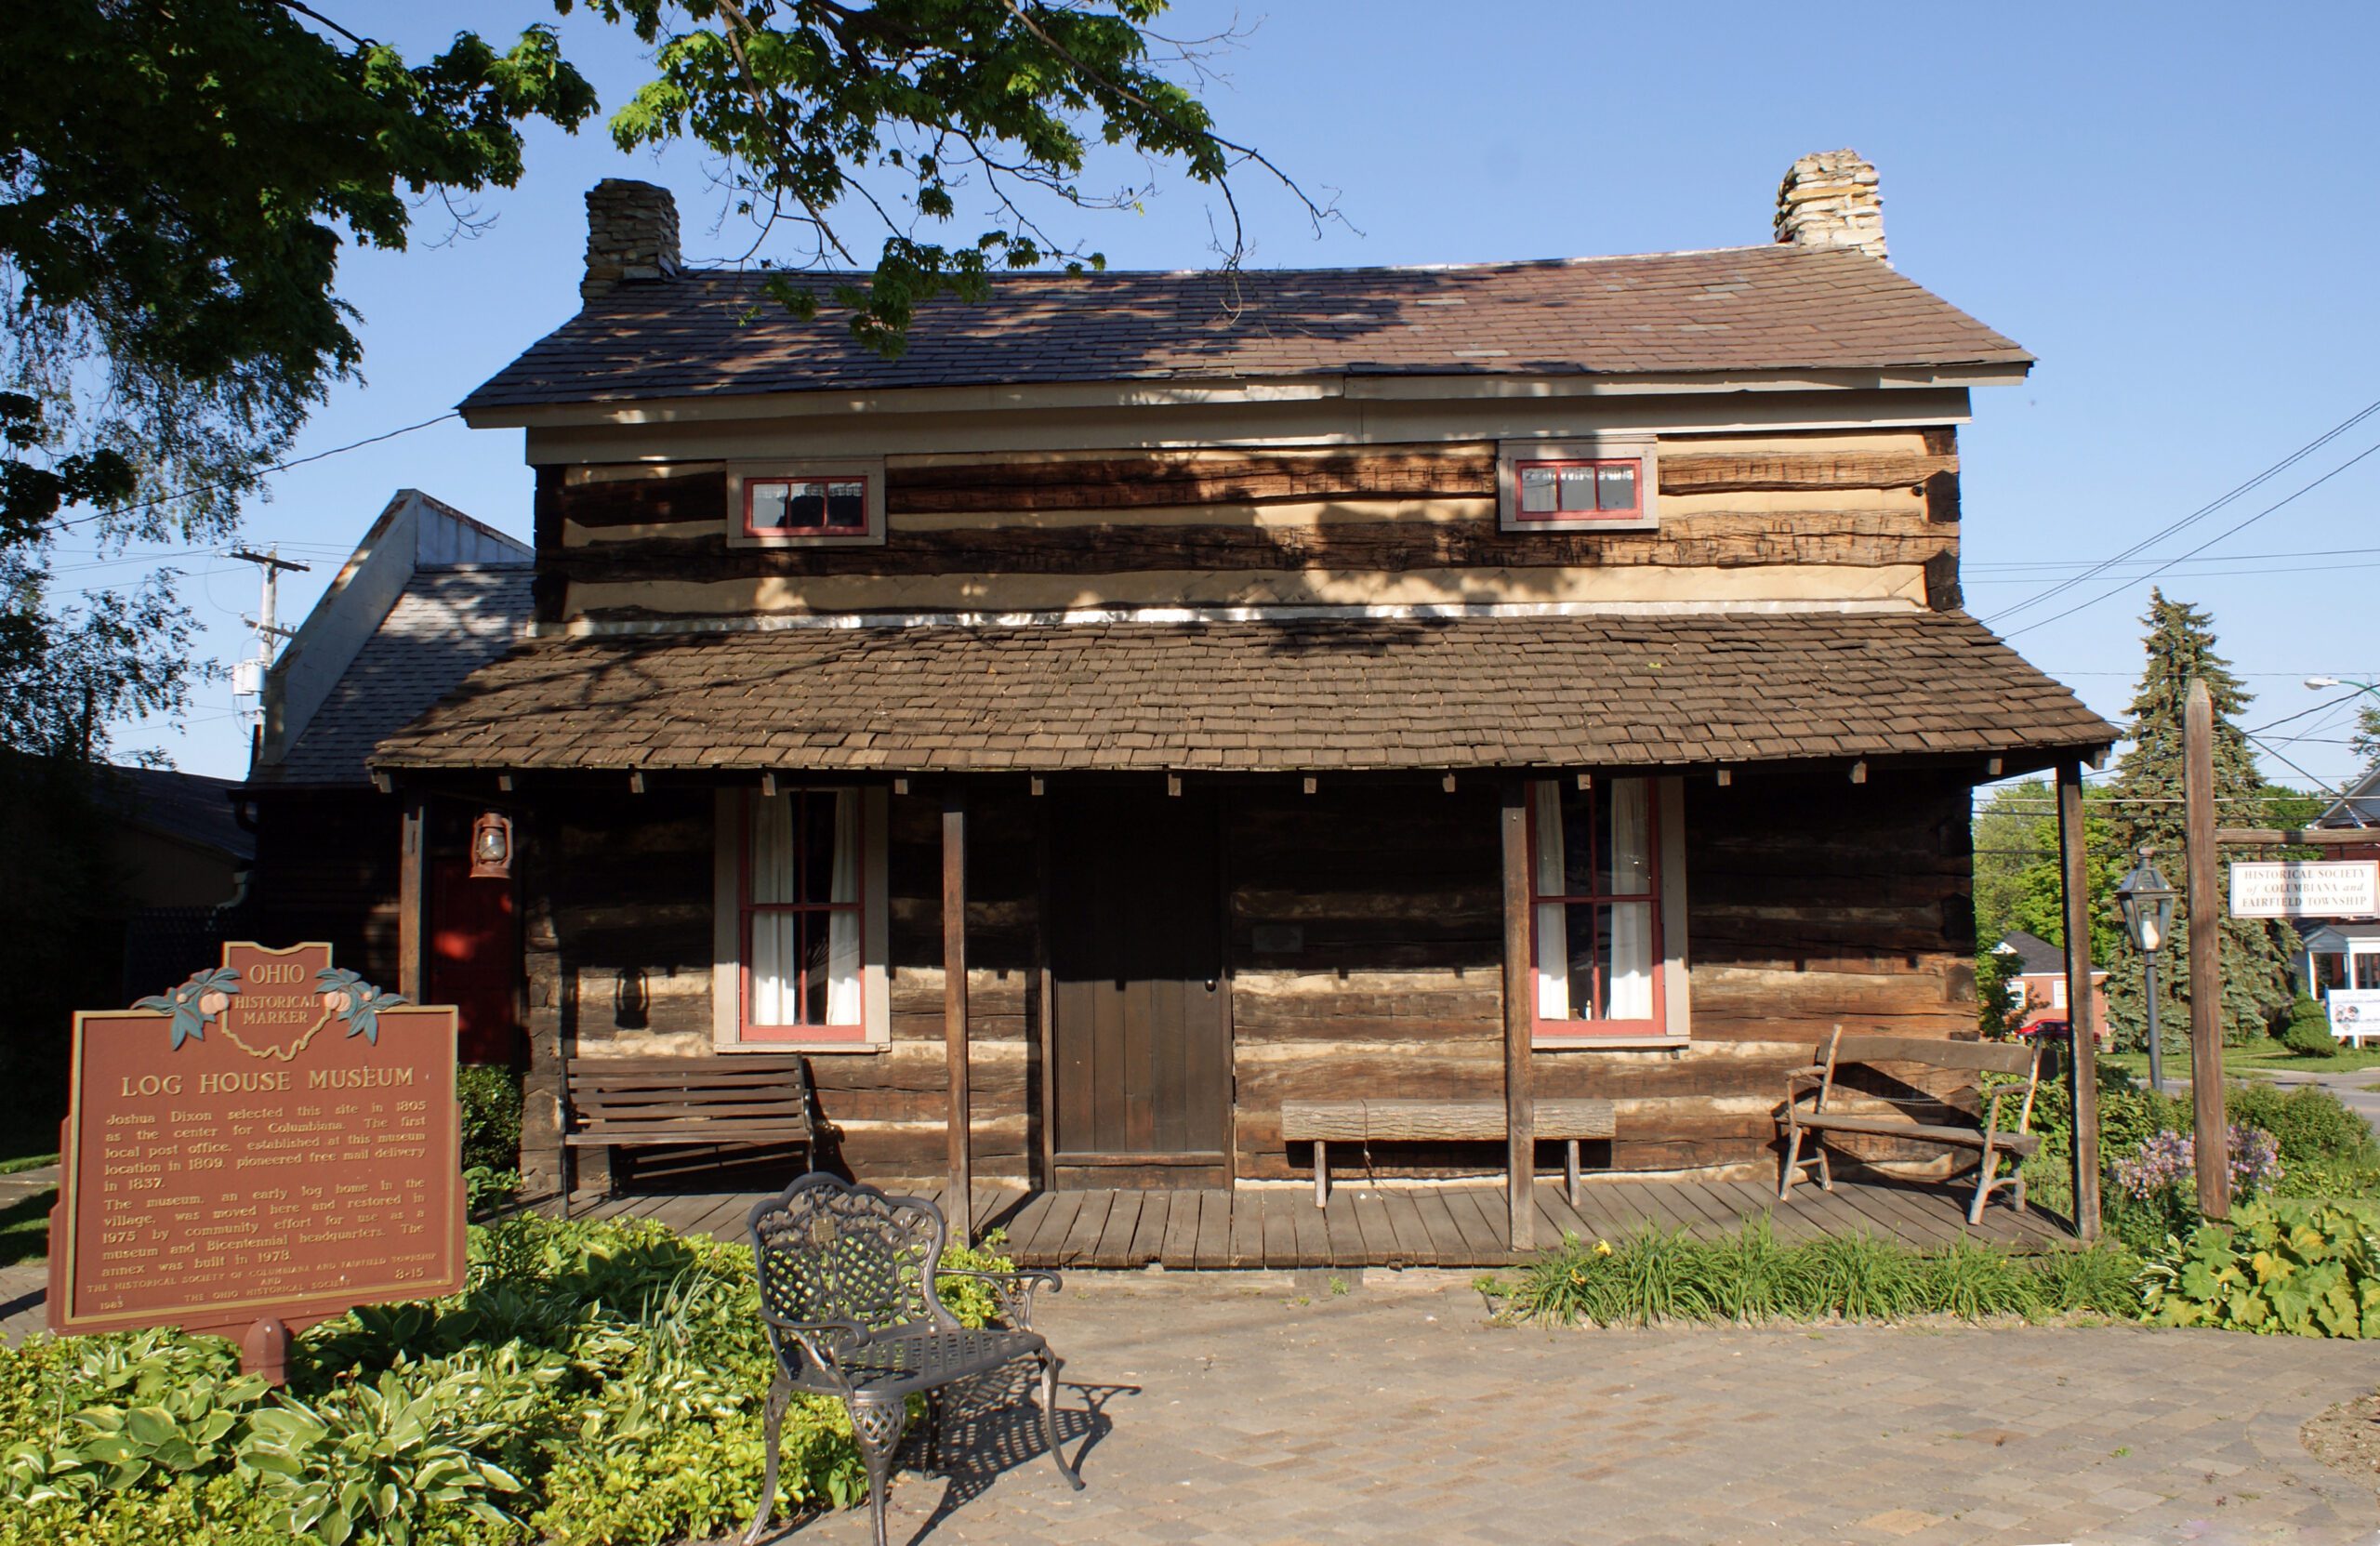 The History of the American Log Home